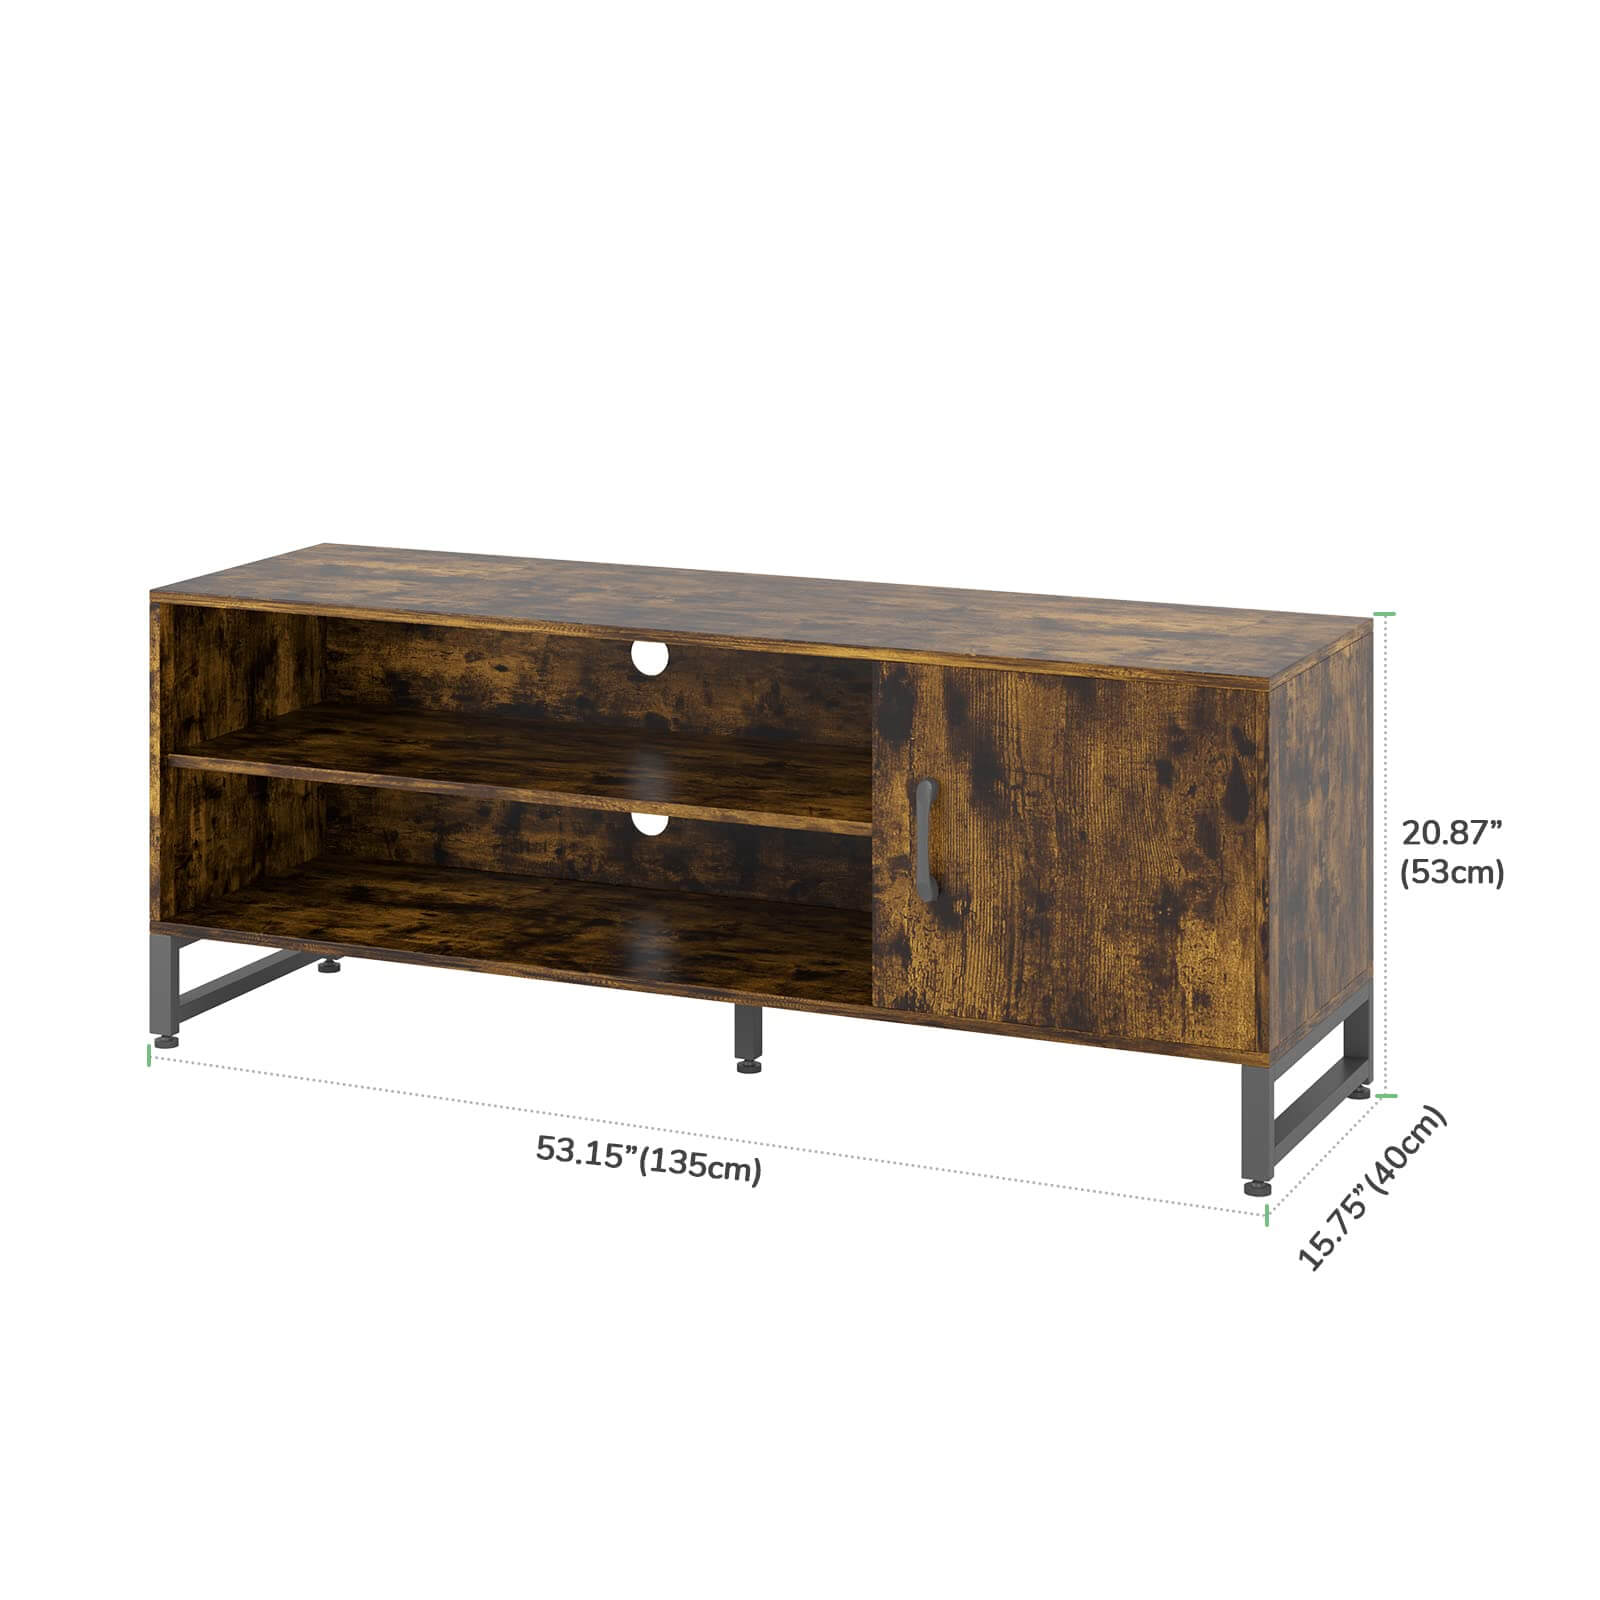 Addition Media Console with Storage Cabinets